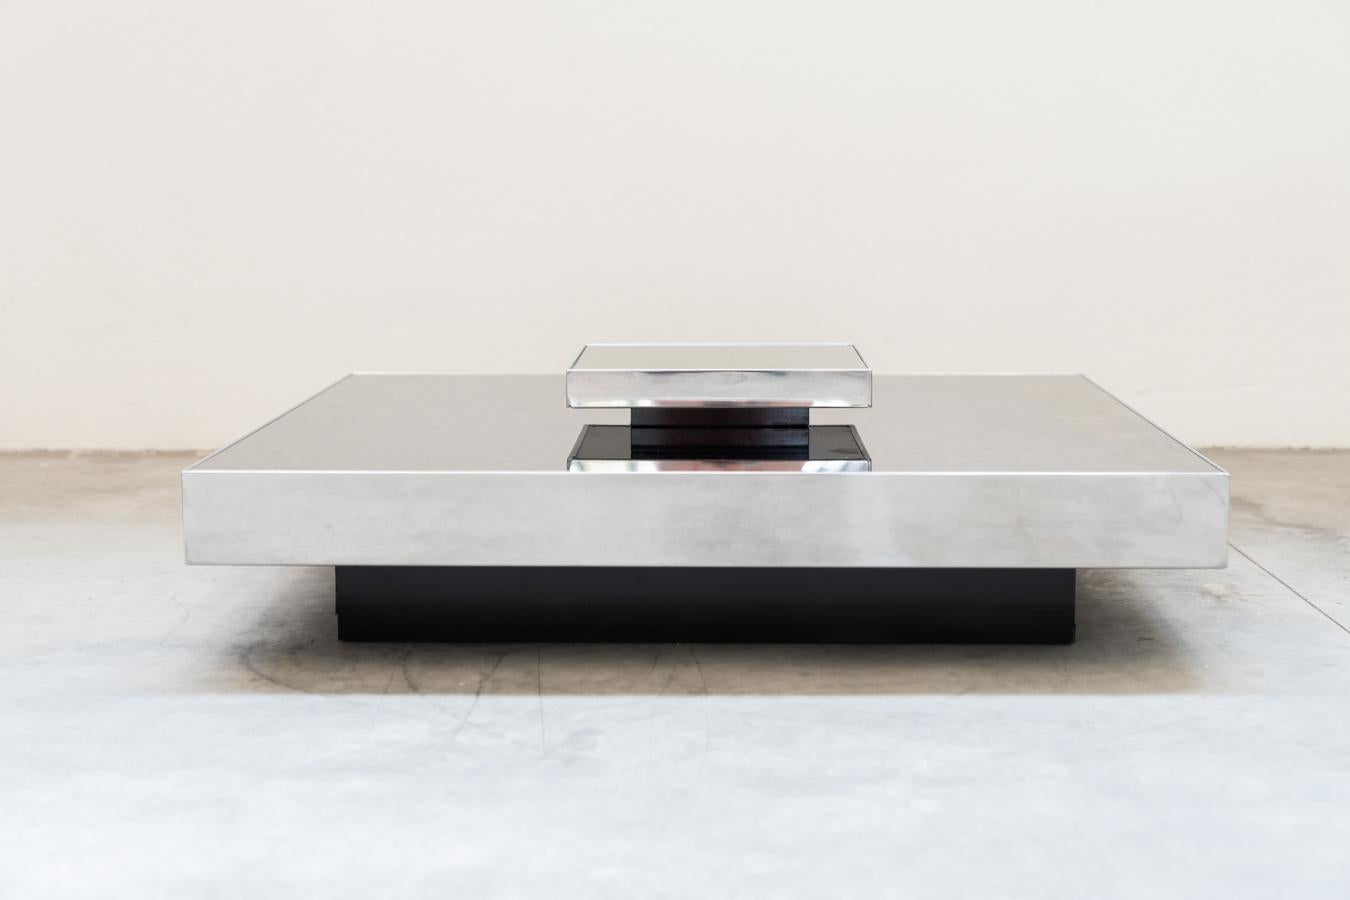 Low coffee table, stainless steel and glass by Ausenda, 1970Style
Vintage
Periodo del design
1970 - 1979
Production Period
1970 - 1979
Year Manufactured
1970
Country of Manufacture
Italy
Maker
Giovanni Ausenda
Manufacturer
Giovanni Ausenda
MEASURES